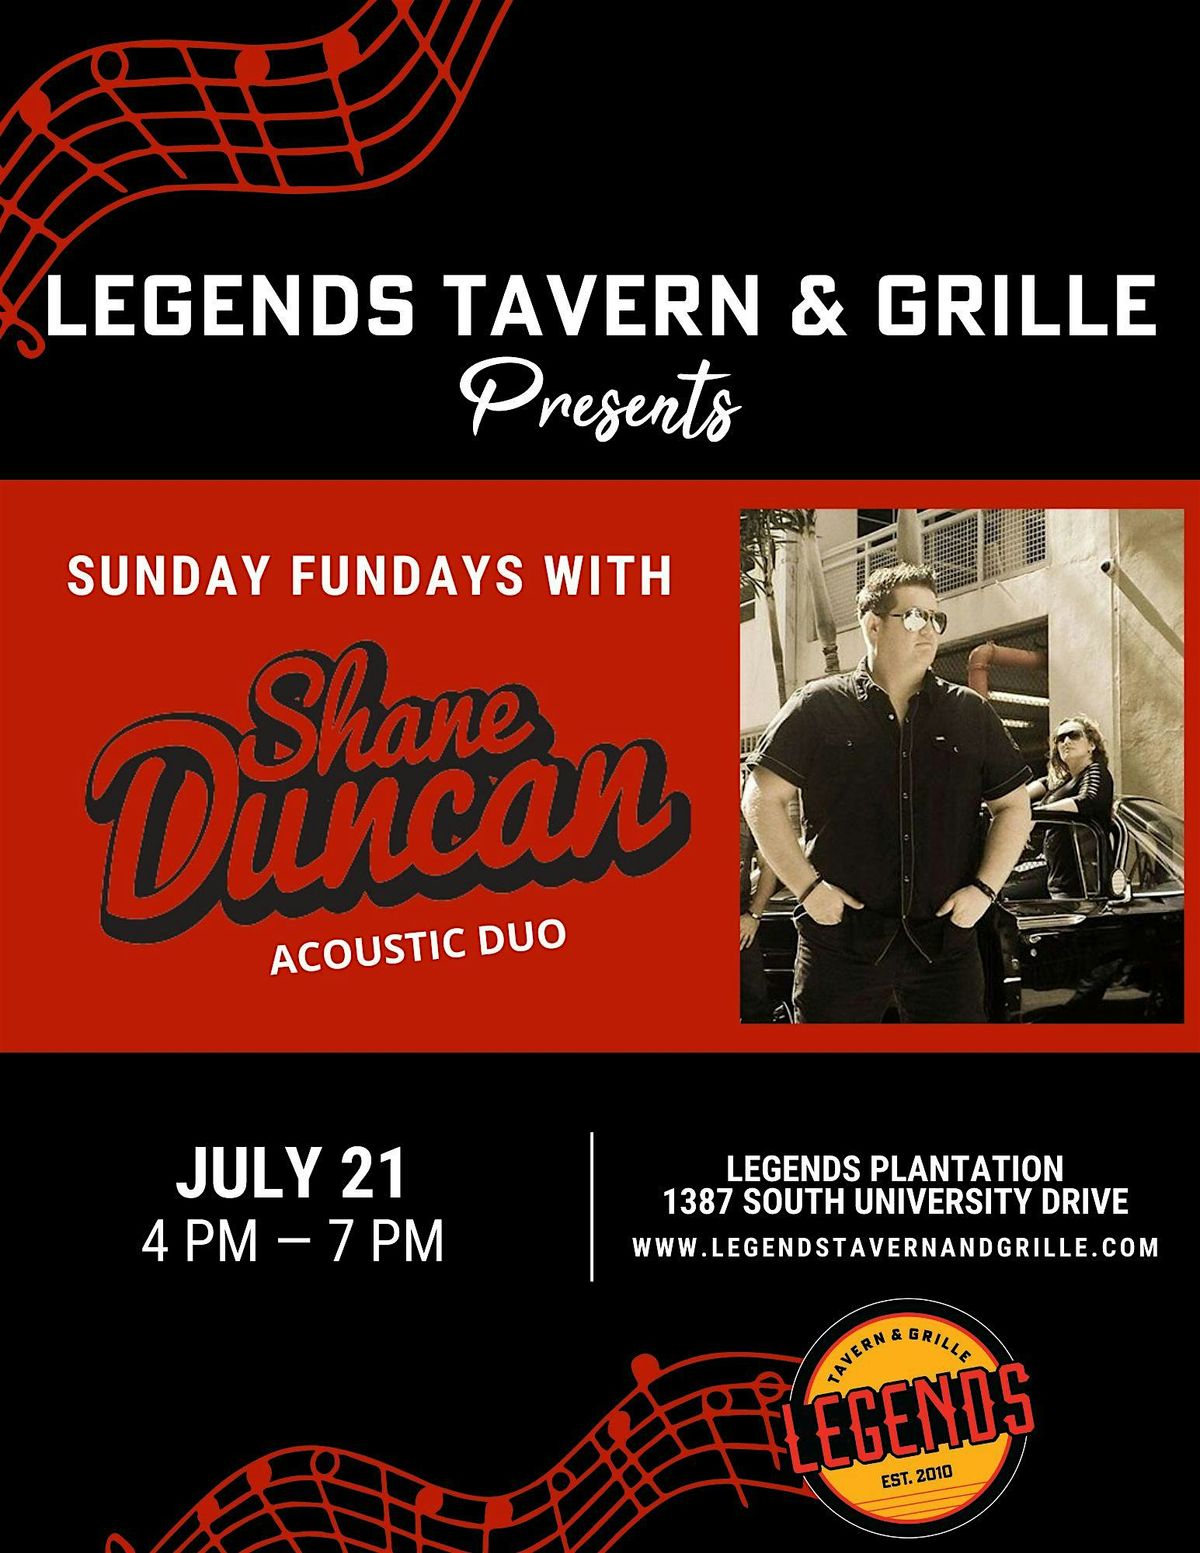 Sunday Funday at Legends Tavern & Grille Plantation With Live Performance by Shane Duncan